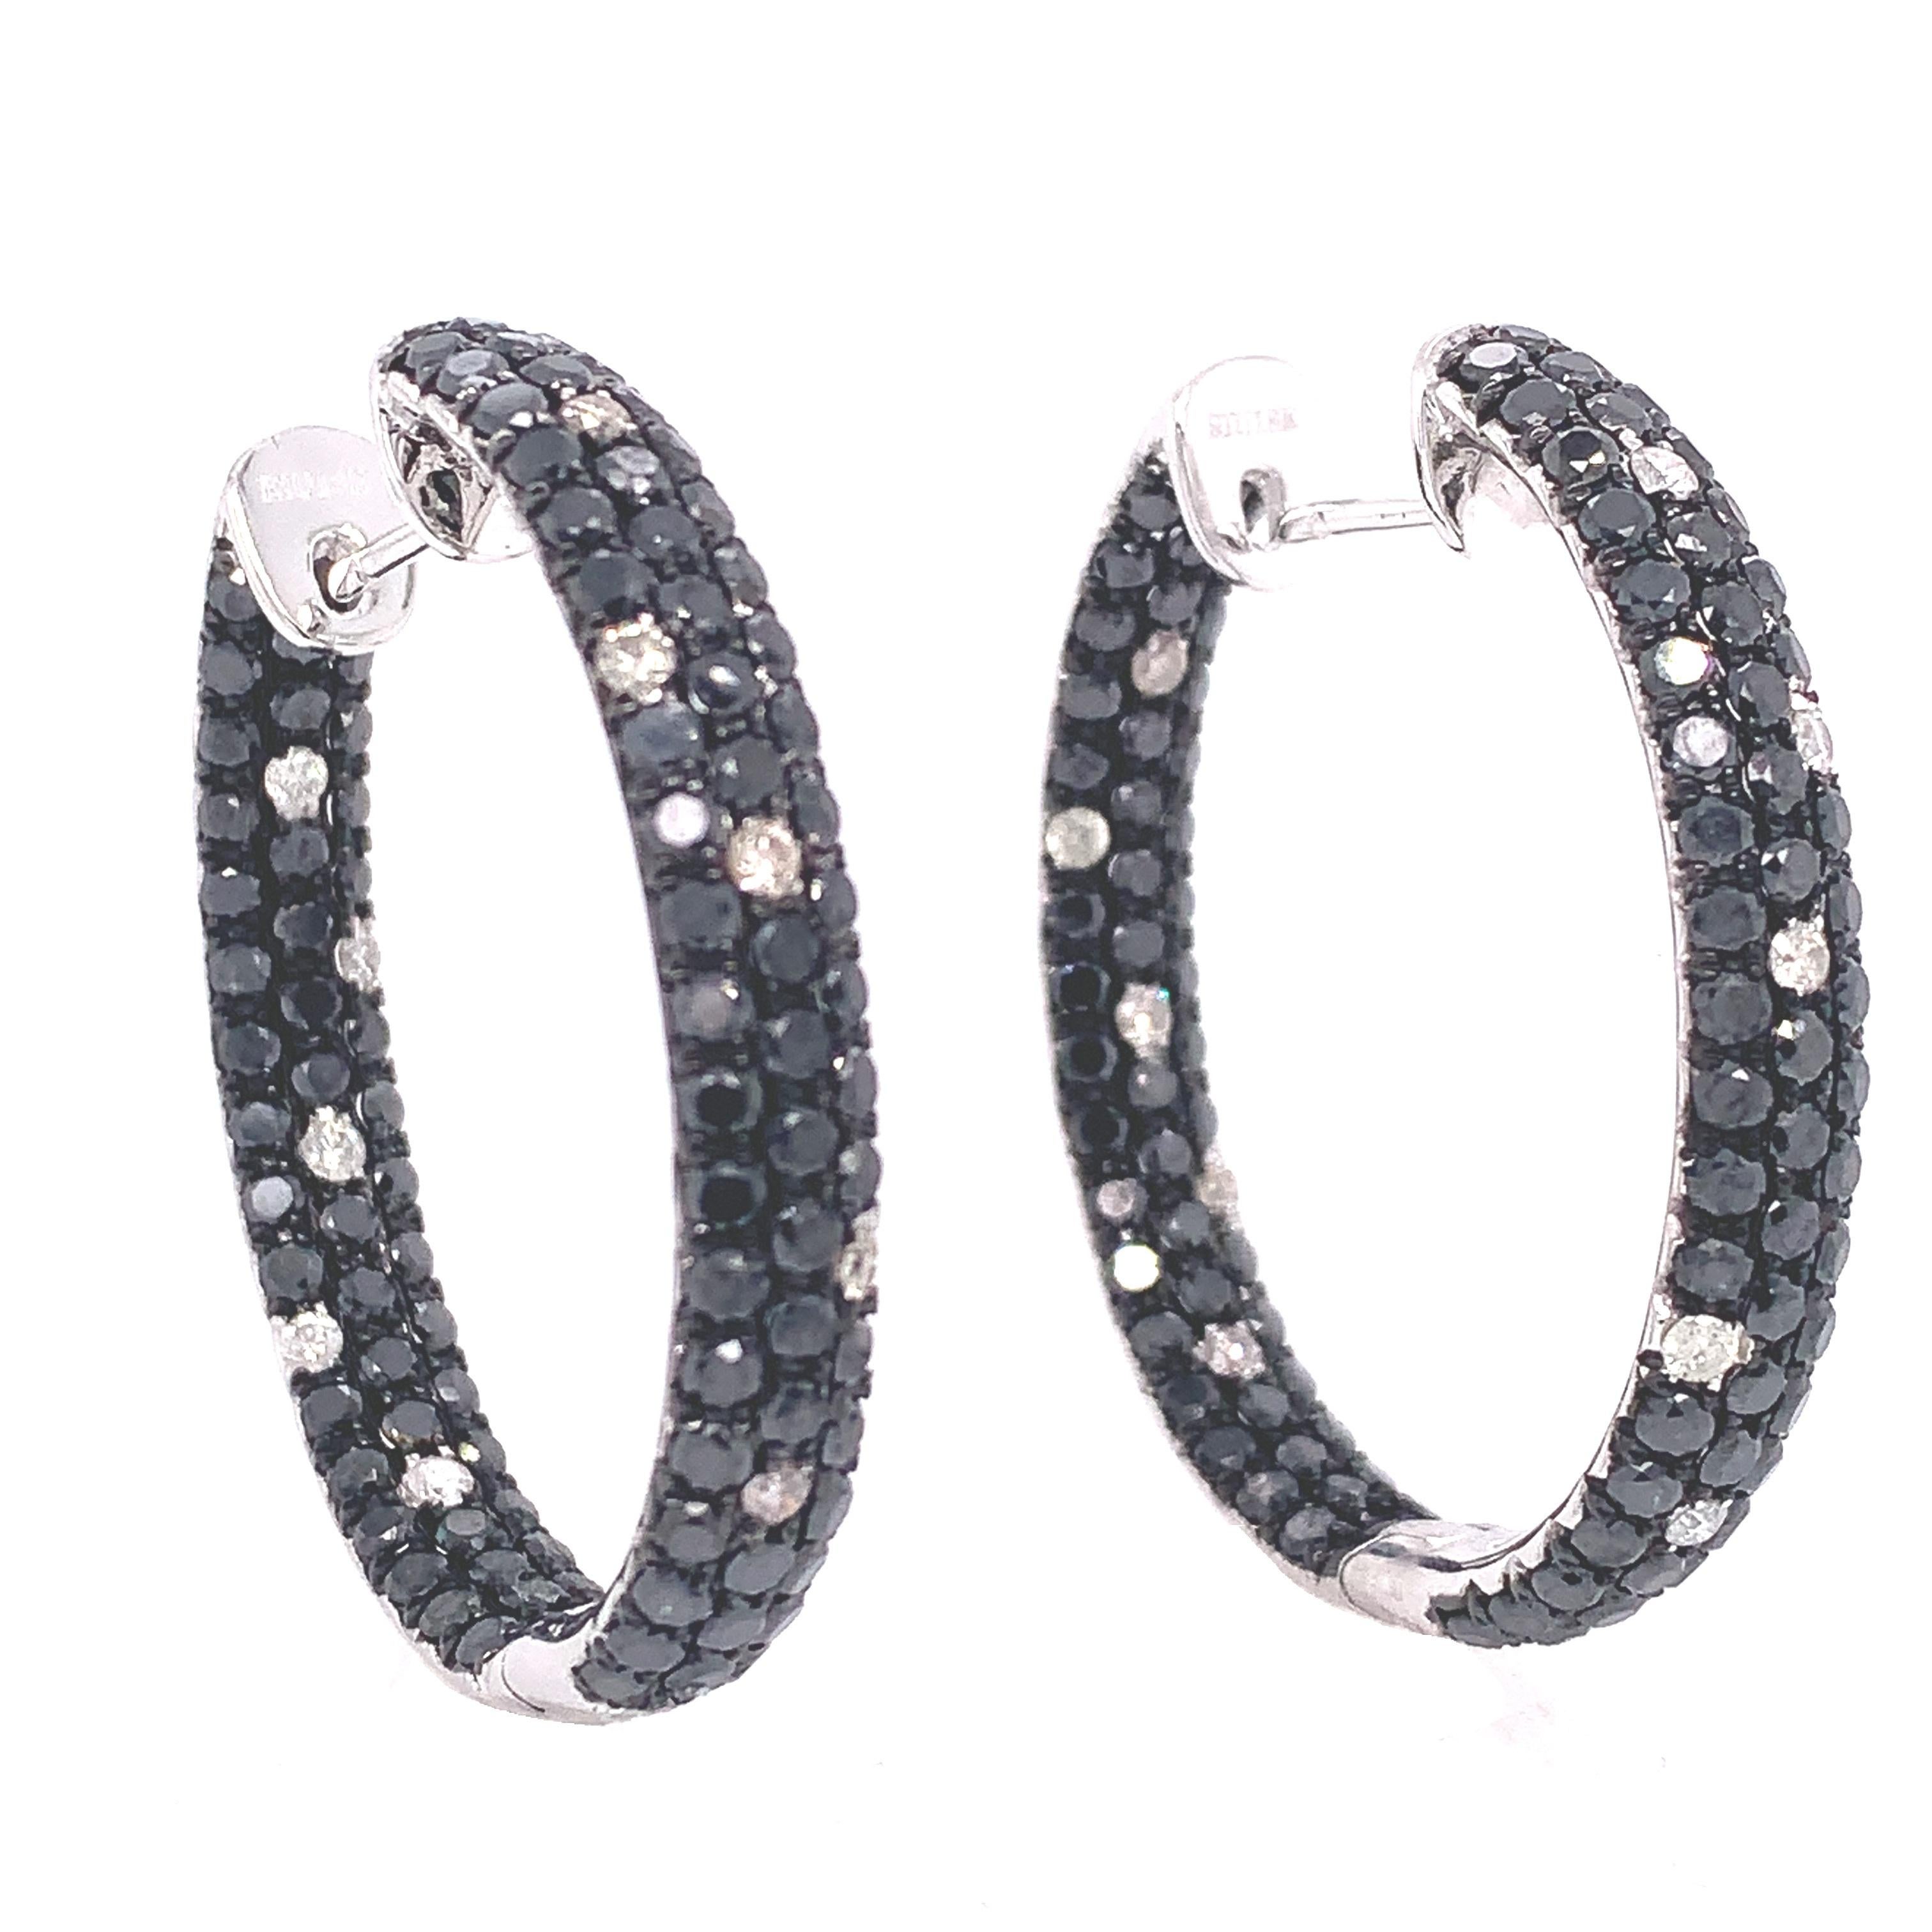 Pa-vey Collection

The eternal magnetism of black Diamonds totaling 0.53 carats are combined with the dazzling brilliance of gently scattered white Diamonds in these 18K white gold hoops.